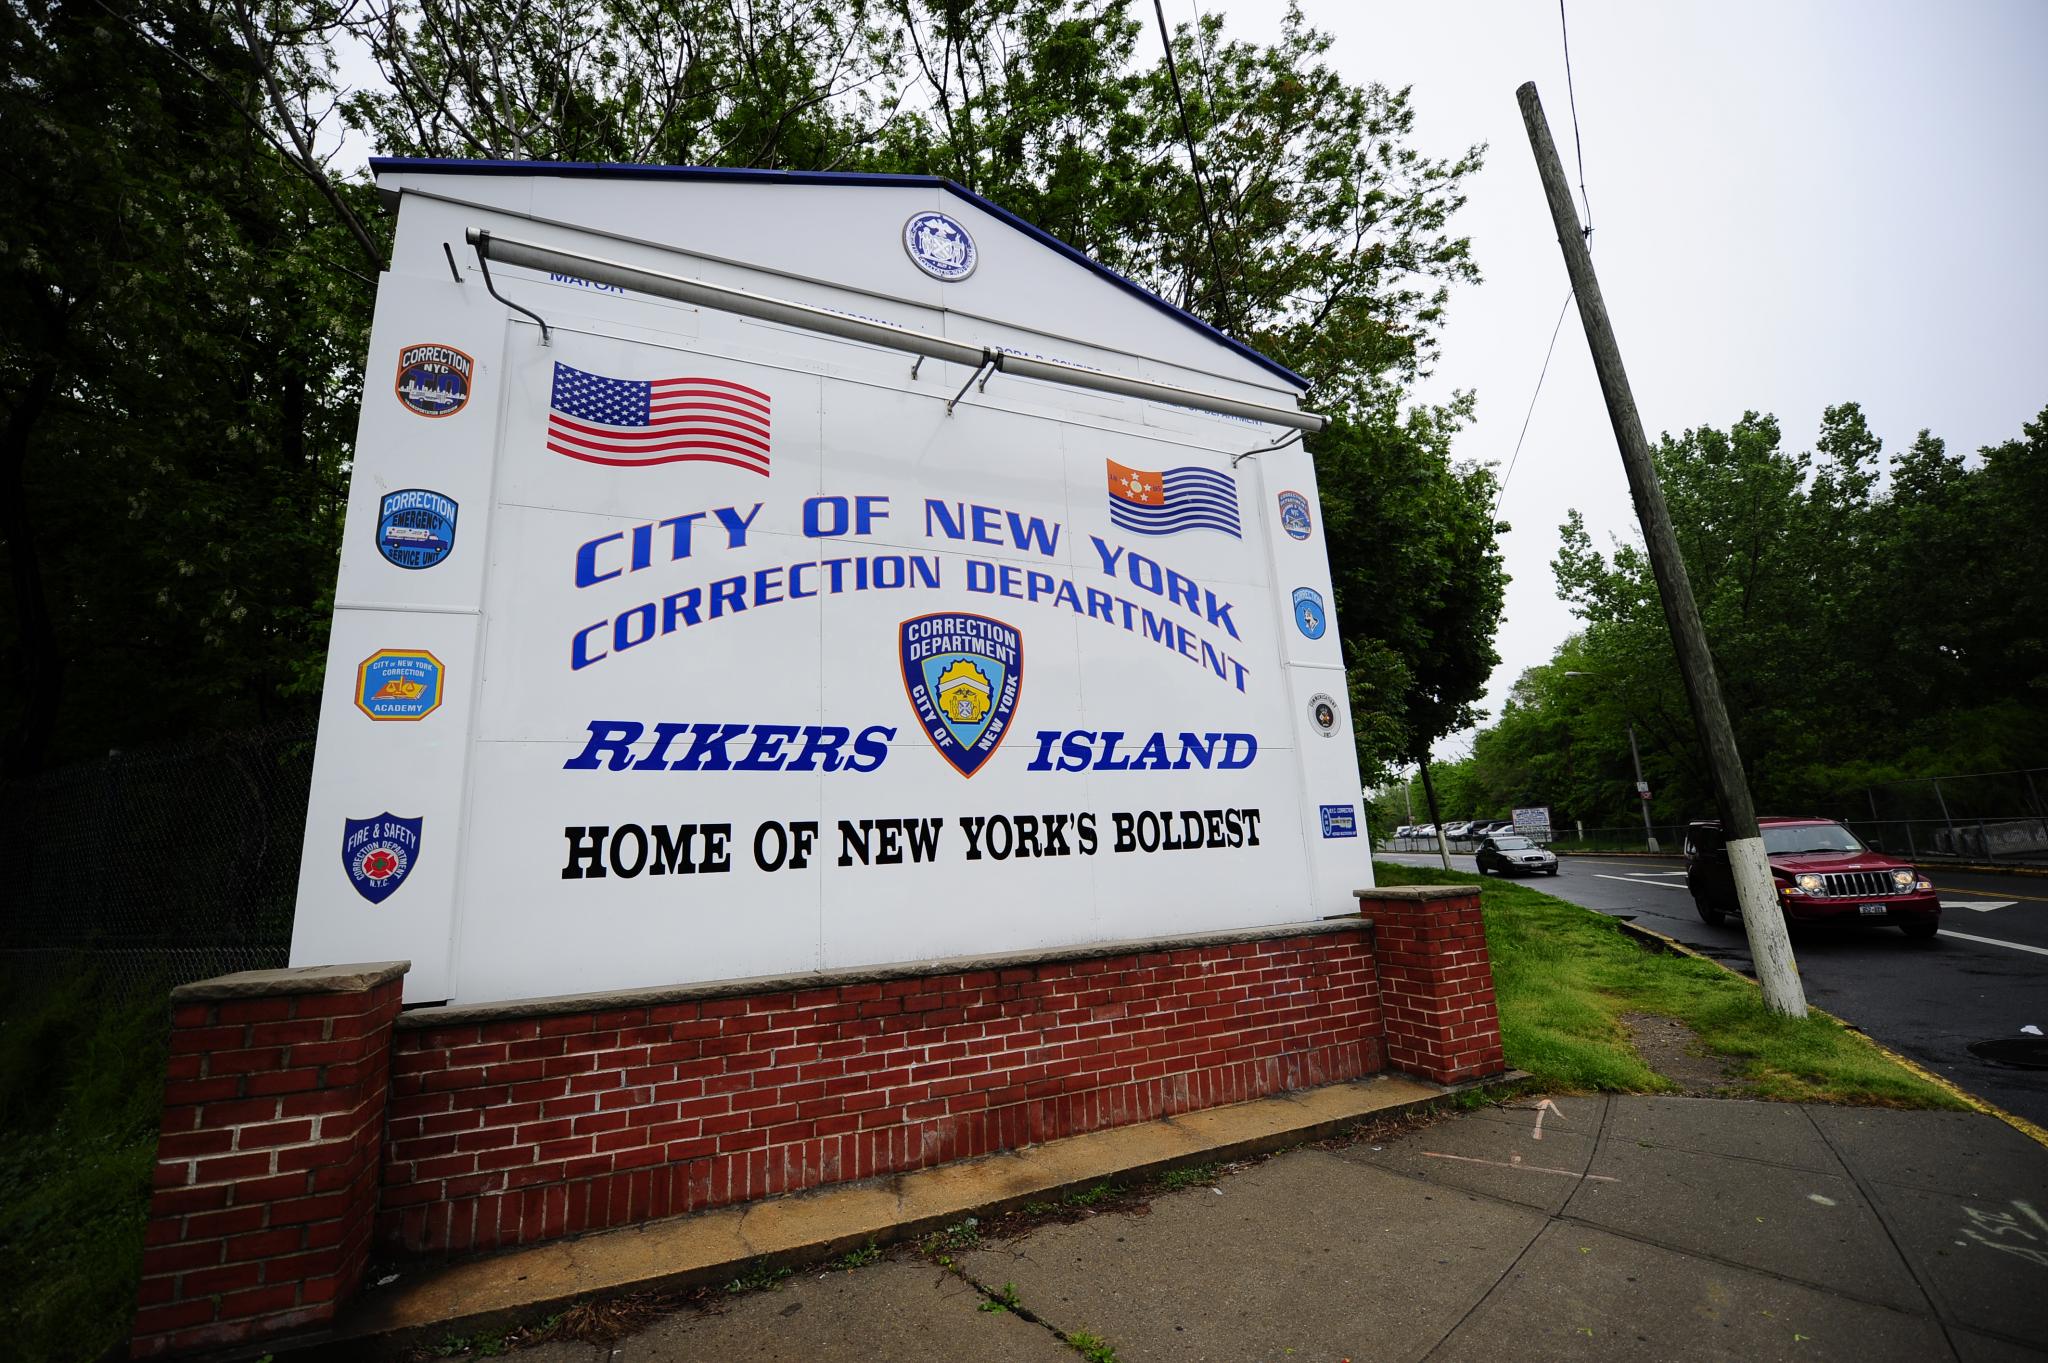 Department of Justice Plans to Sue New York City Over Conditions at Rikers Island